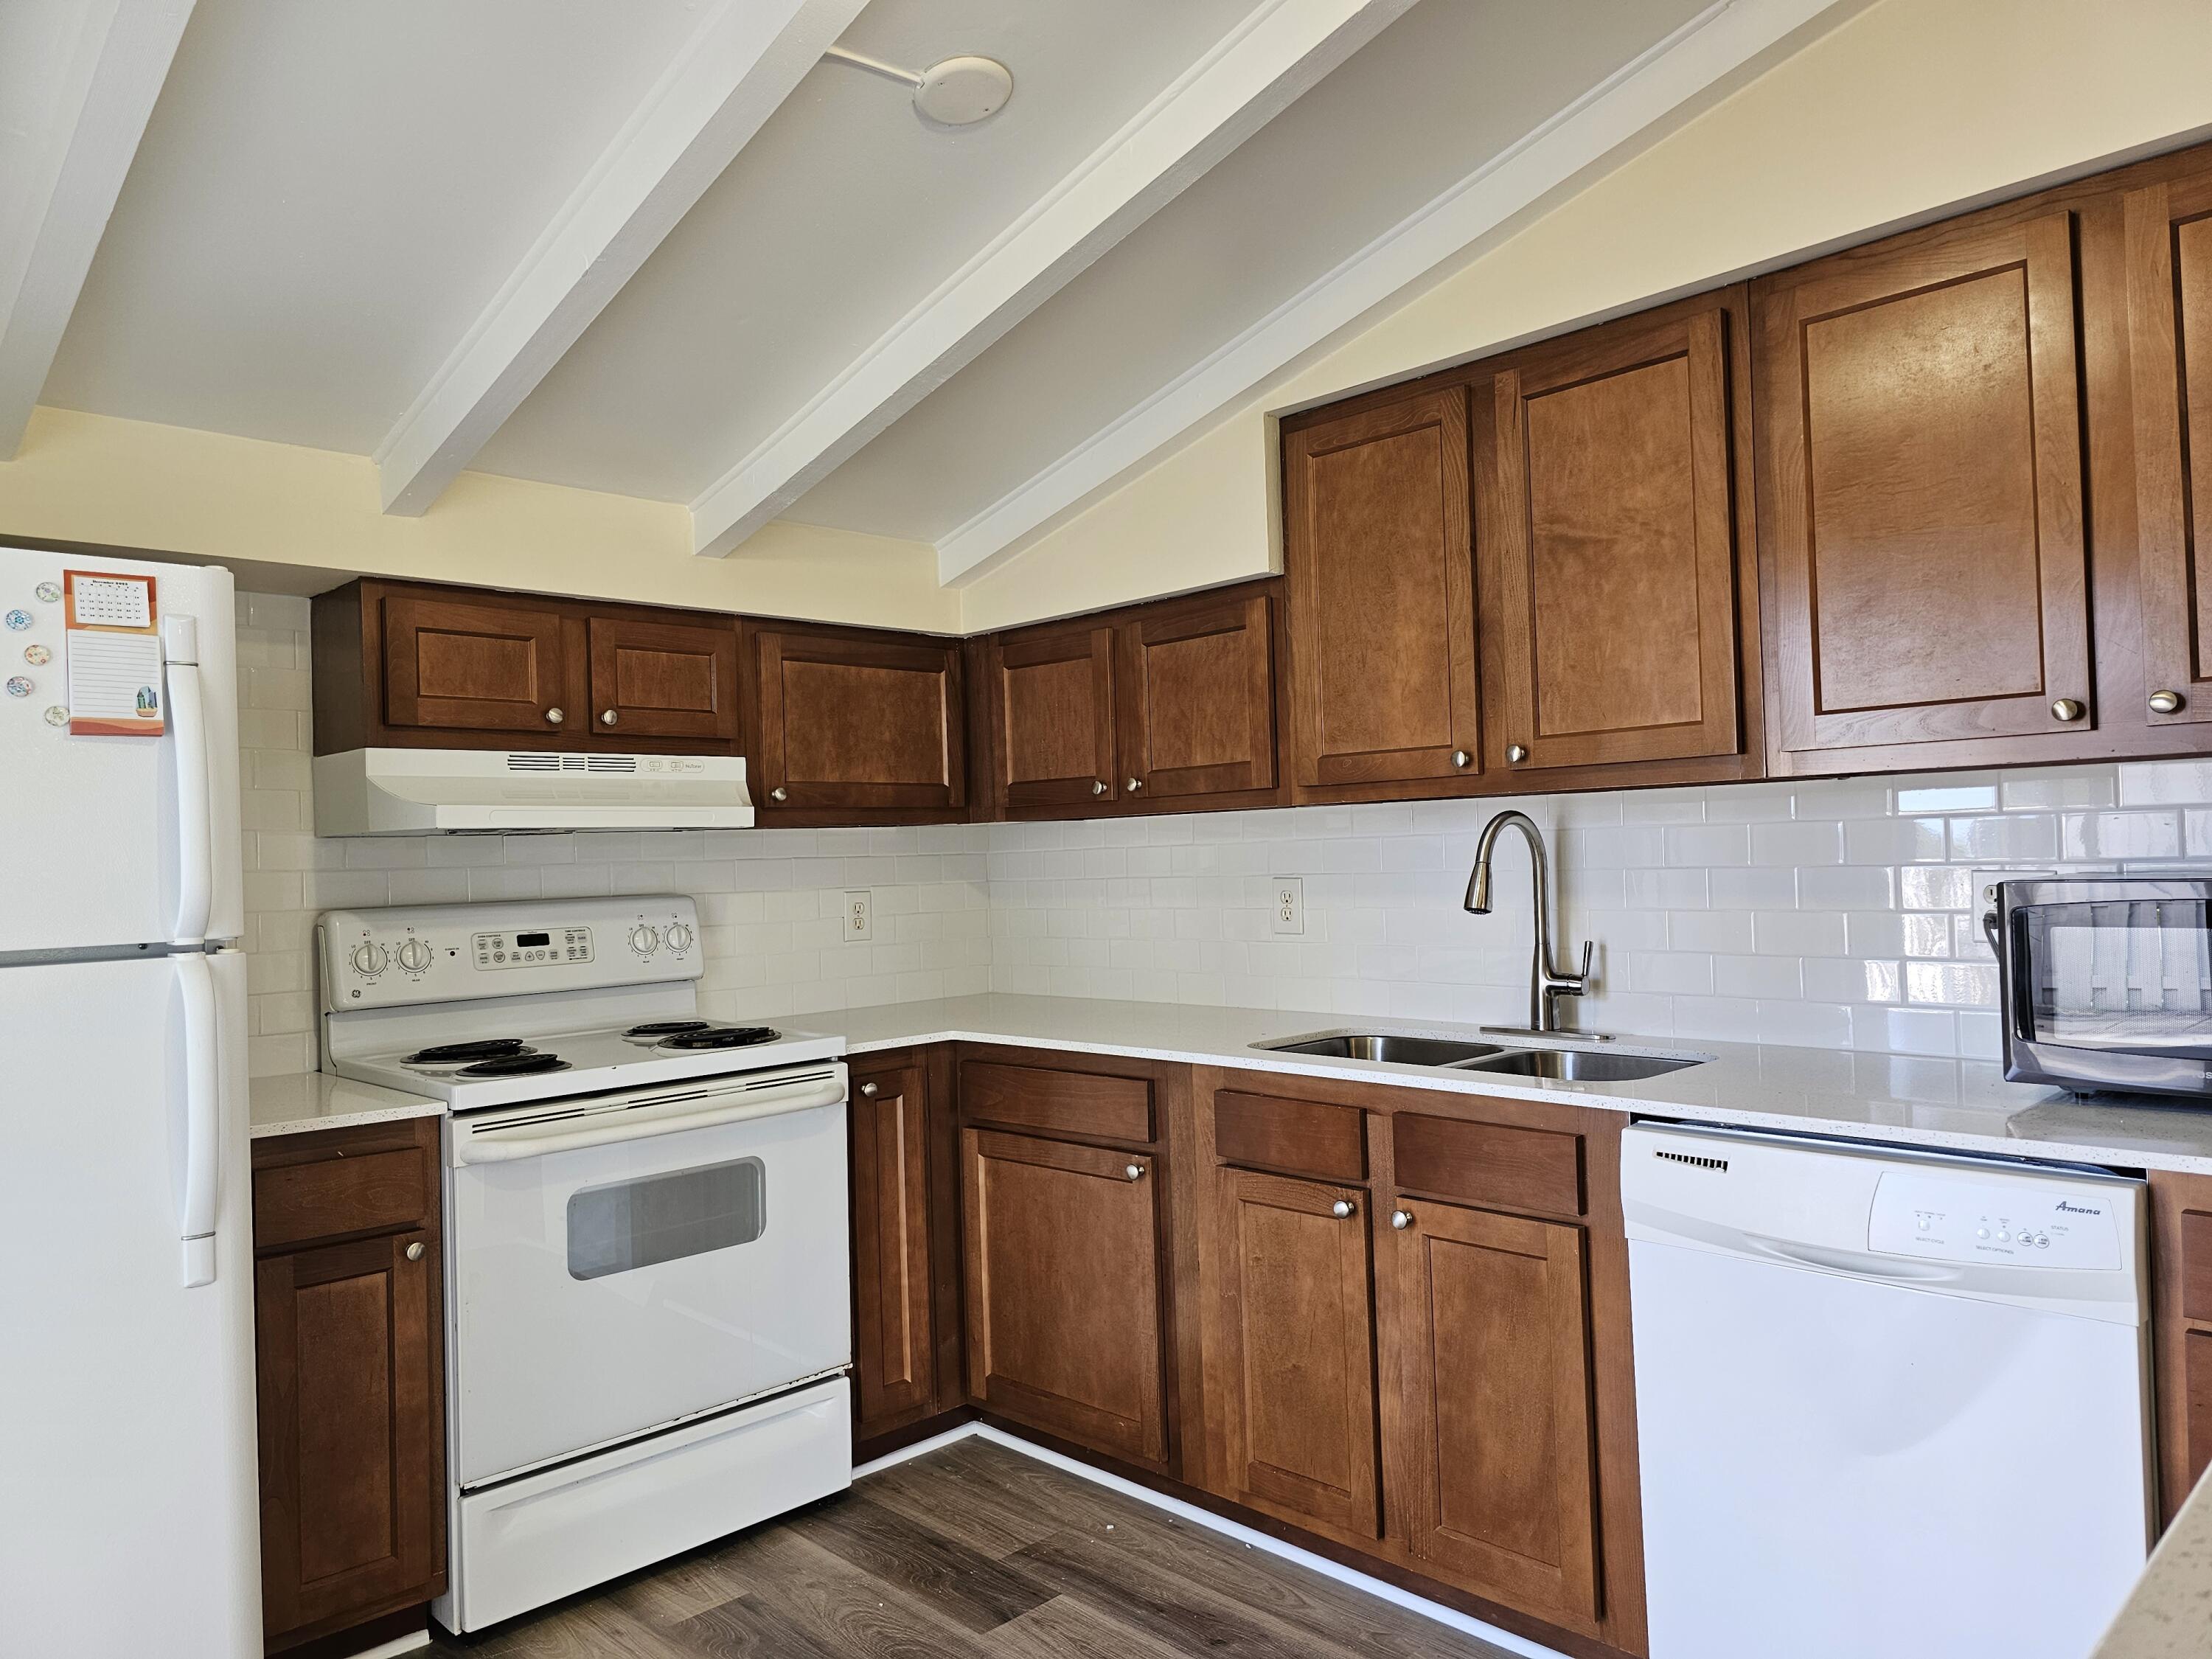 a kitchen with stainless steel appliances granite countertop a sink stove and refrigerator with wooden cabinets